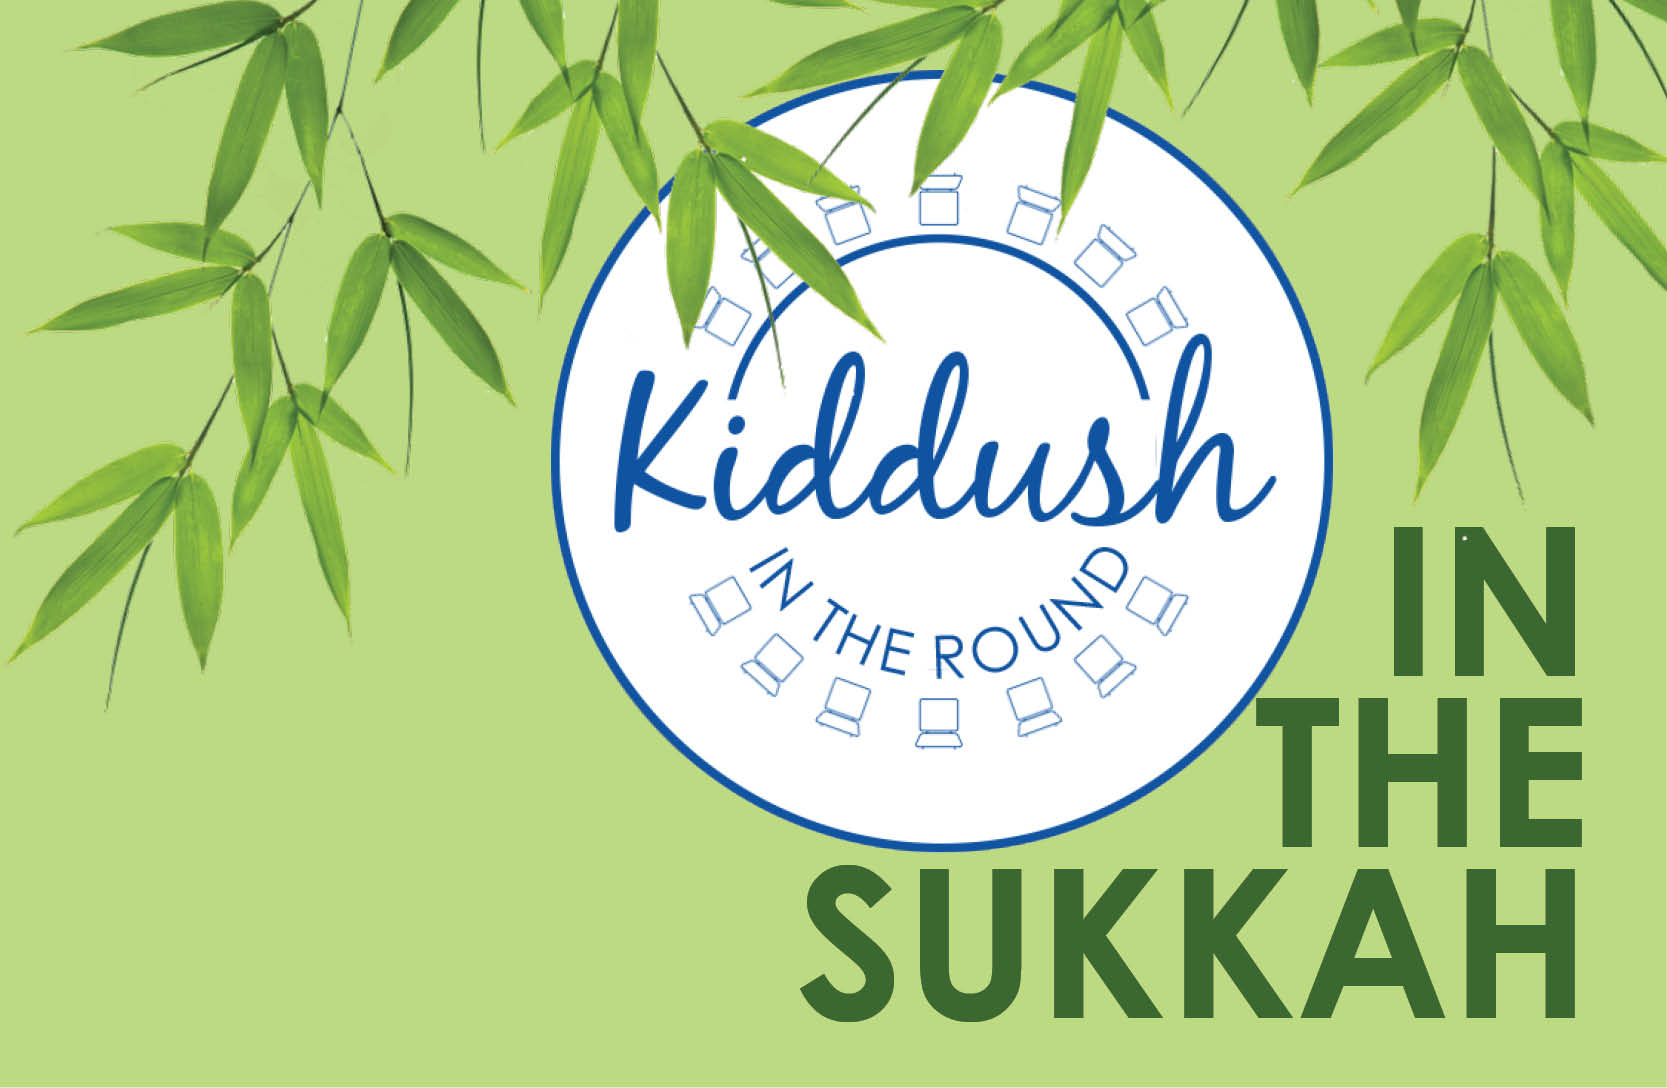 Kiddush luncheon in the Sukkah following services